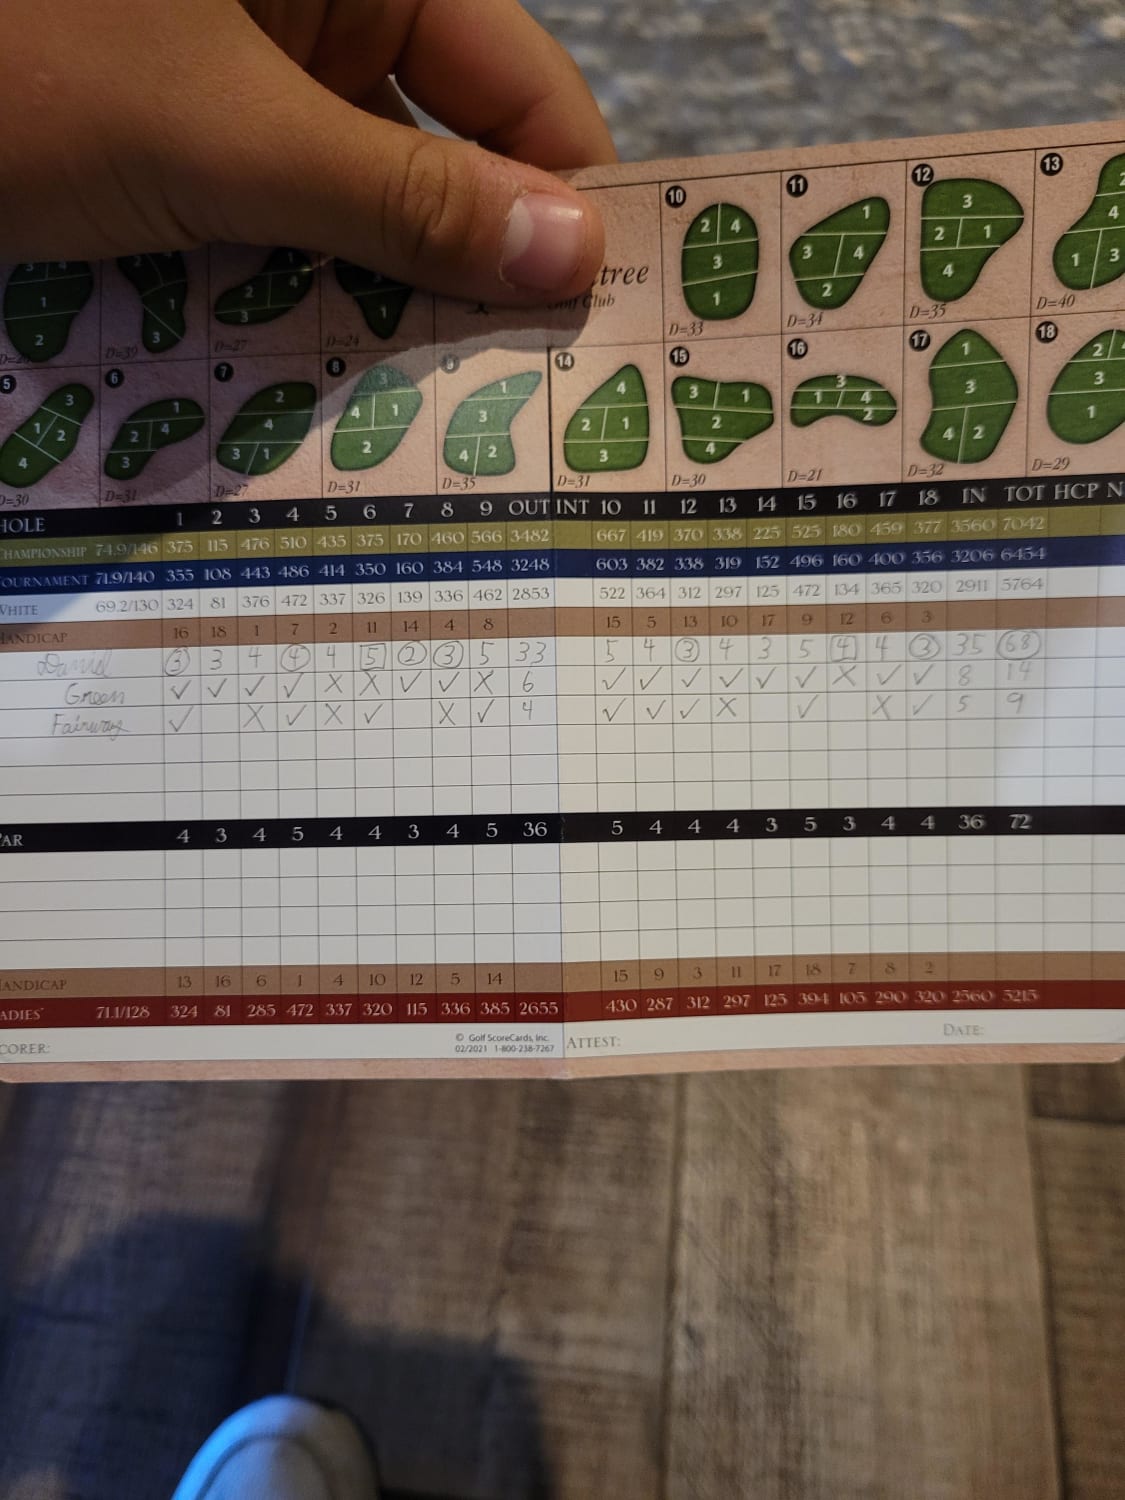 Shot my best round to course handicap ever. 68 from the tips (74.9/156, par 72)